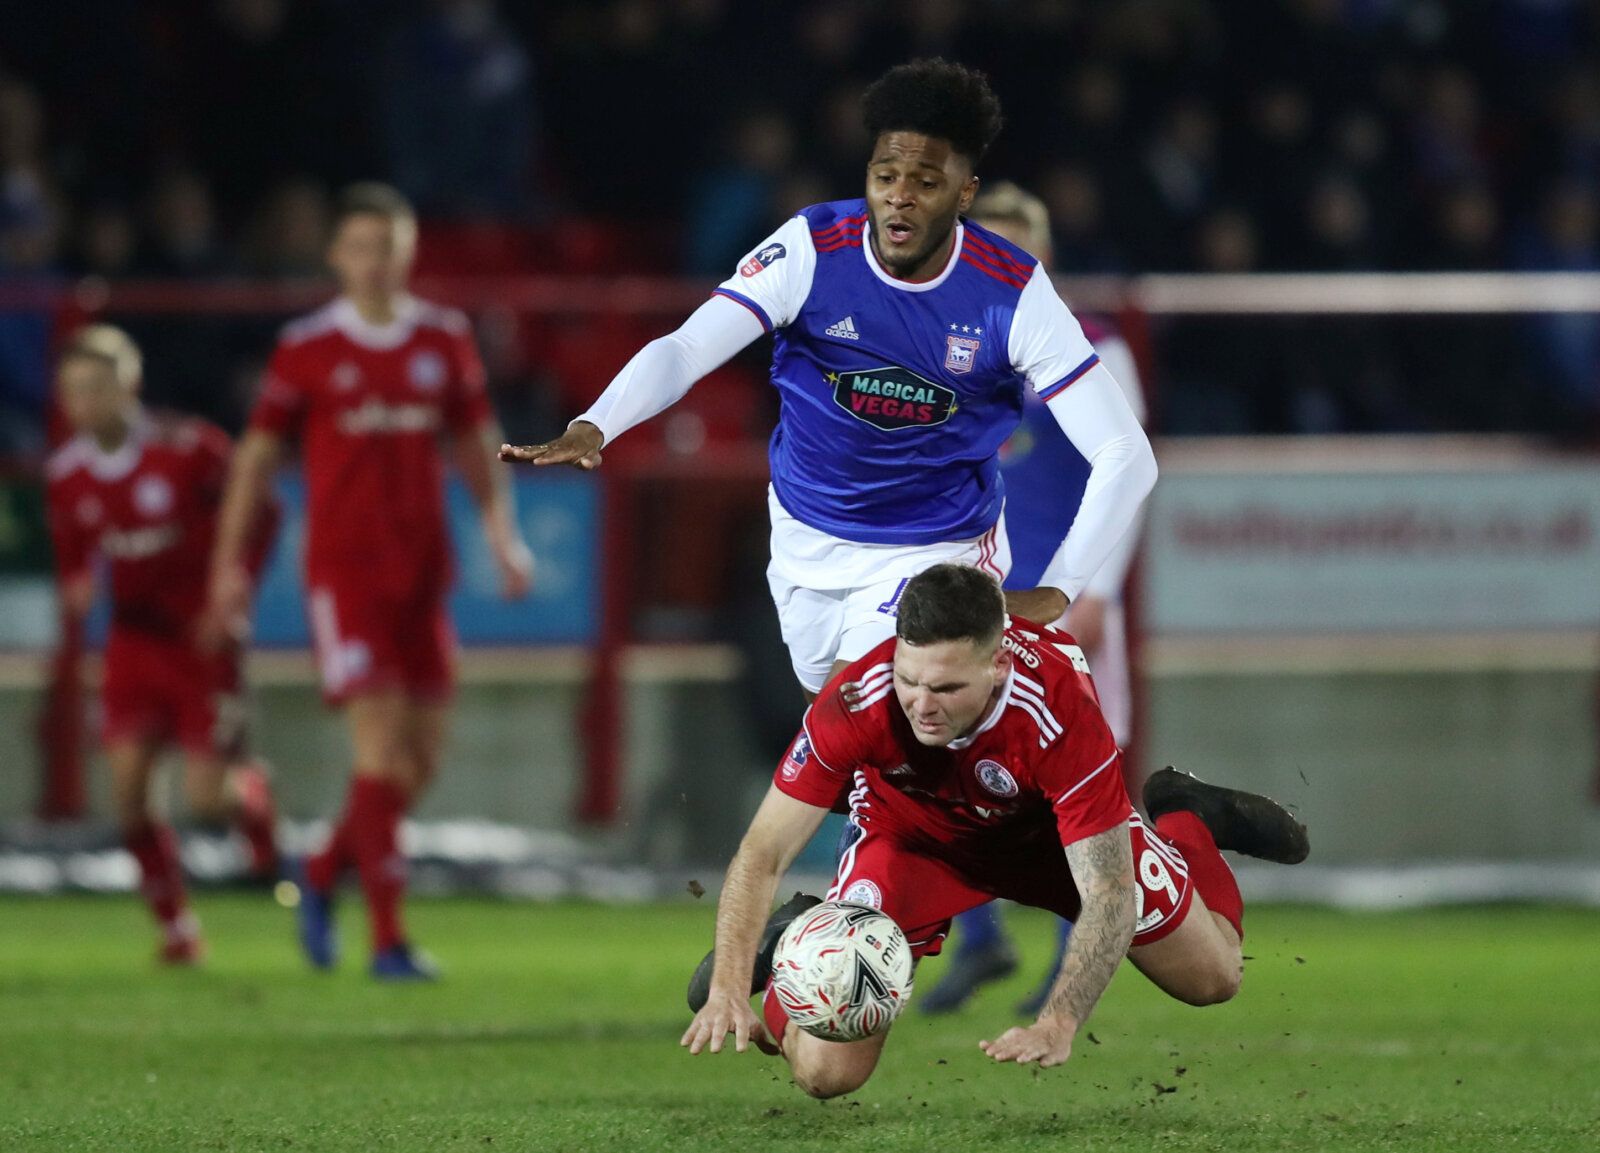 Soccer Football - FA Cup Third Round - Accrington Stanley v Ipswich Town - Wham Stadium, Accrington, Britain - January 5, 2019  Accrington Stanley's Billy Kee in action with Ipswich Town's Ellis Harrison          Action Images/John Clifton